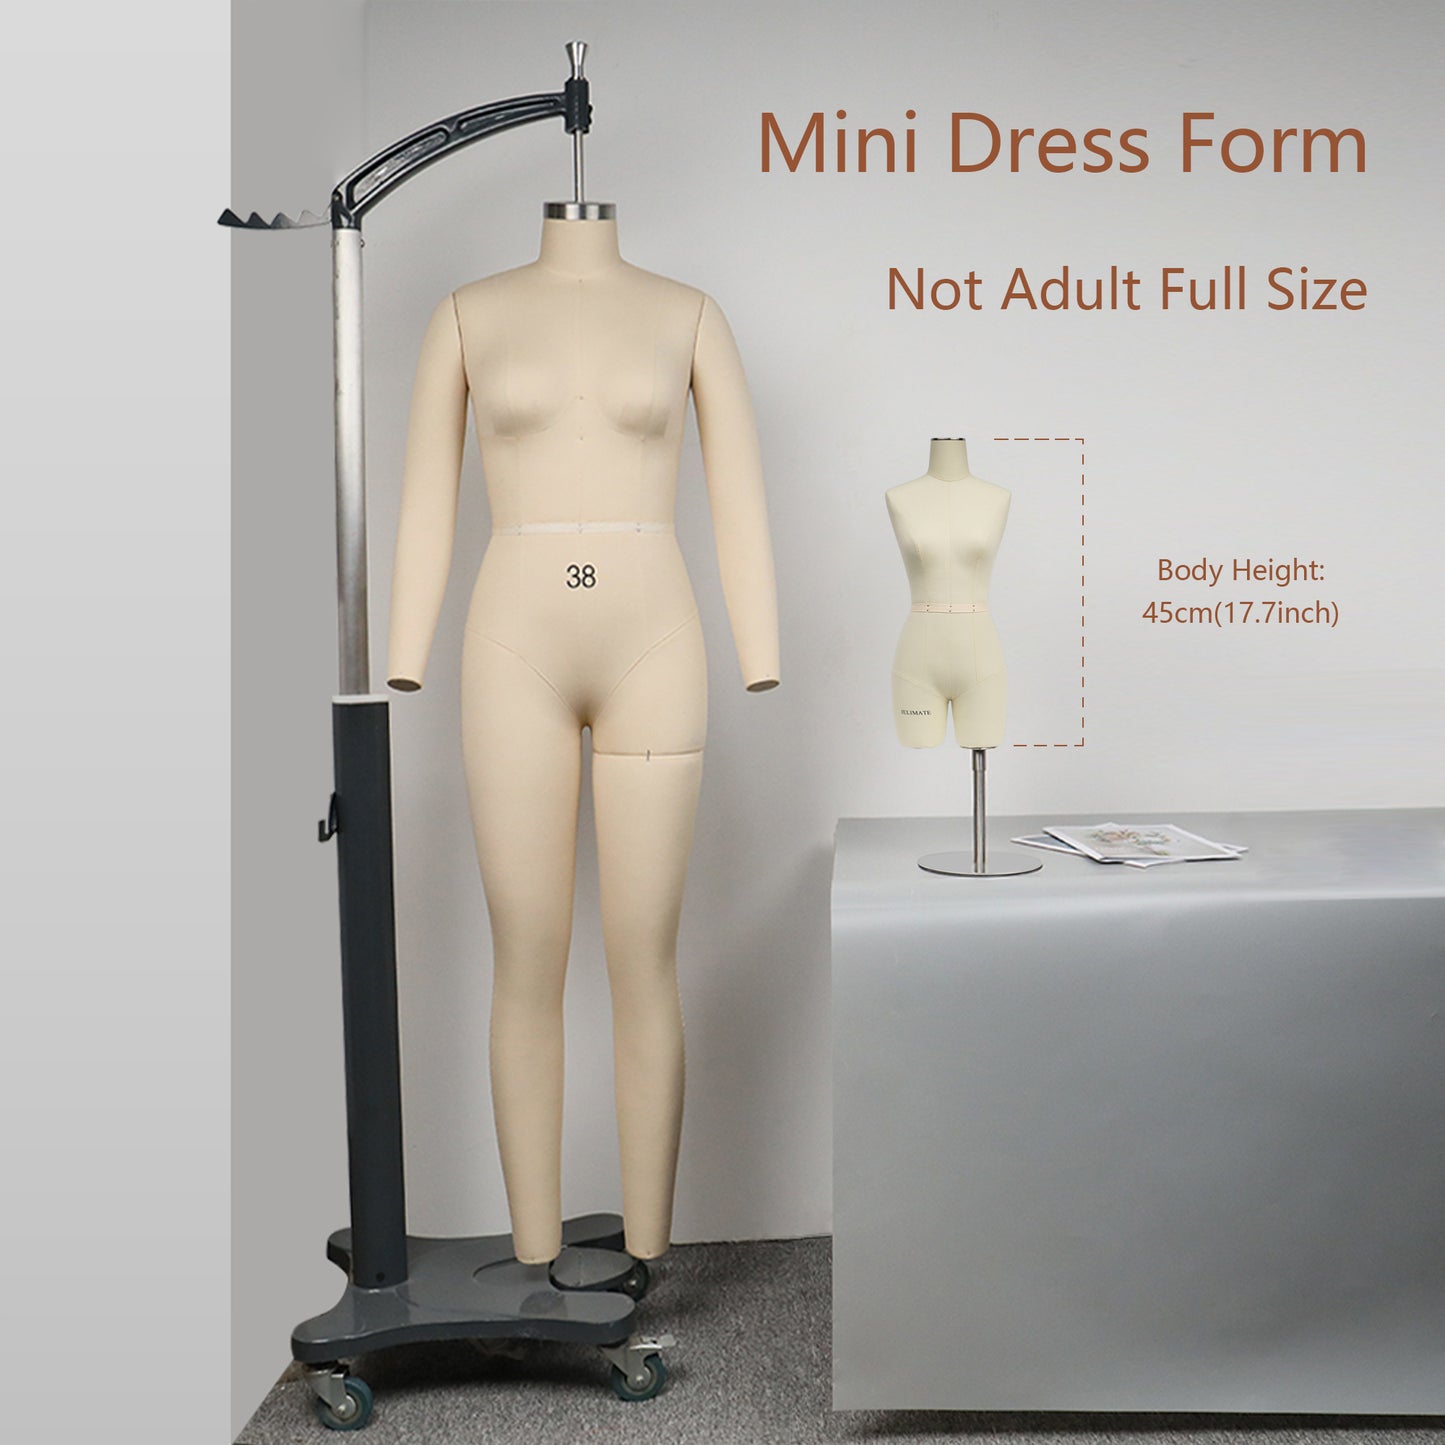 JMSIZE8 Half Scale Female Dress Form For Pattern Making,1/2 Scale Miniature Sewing Mannequin for Women,Mini Tailor Mannequin for Fashion Designer Fashion School Draping Mannequin